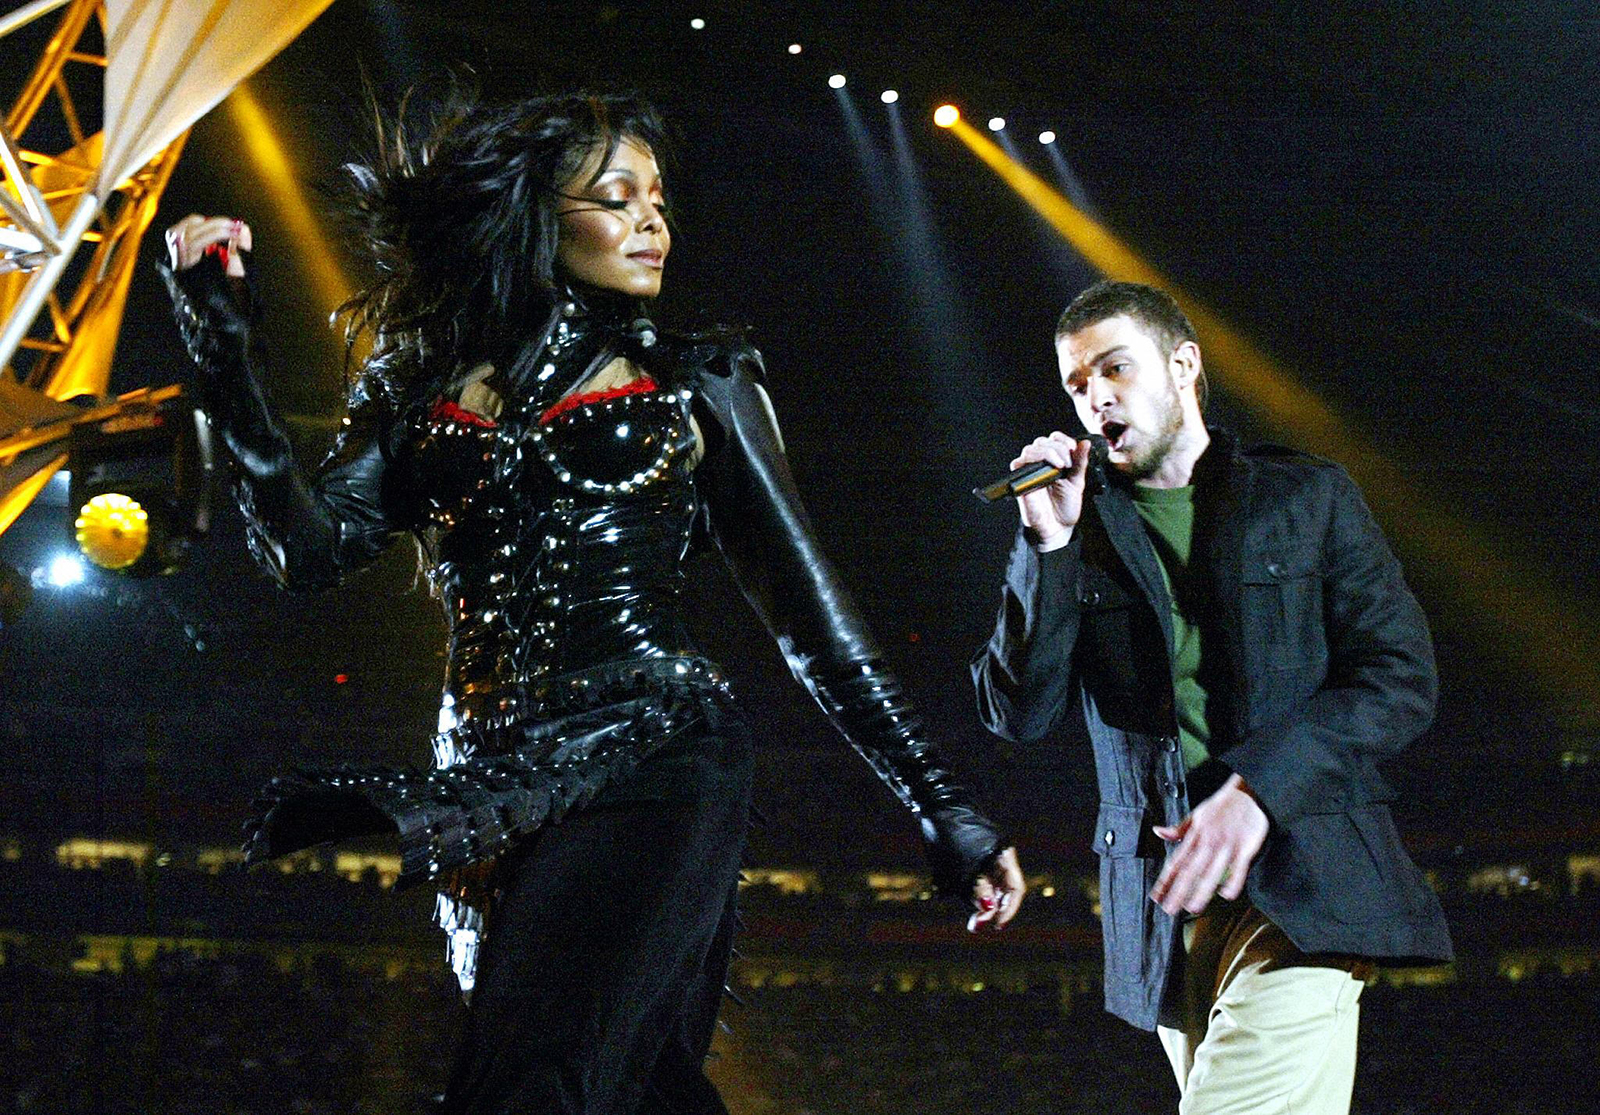 Janet Jackson and Justin Timberlake perform at halftime at the Super Bowl in 2004.